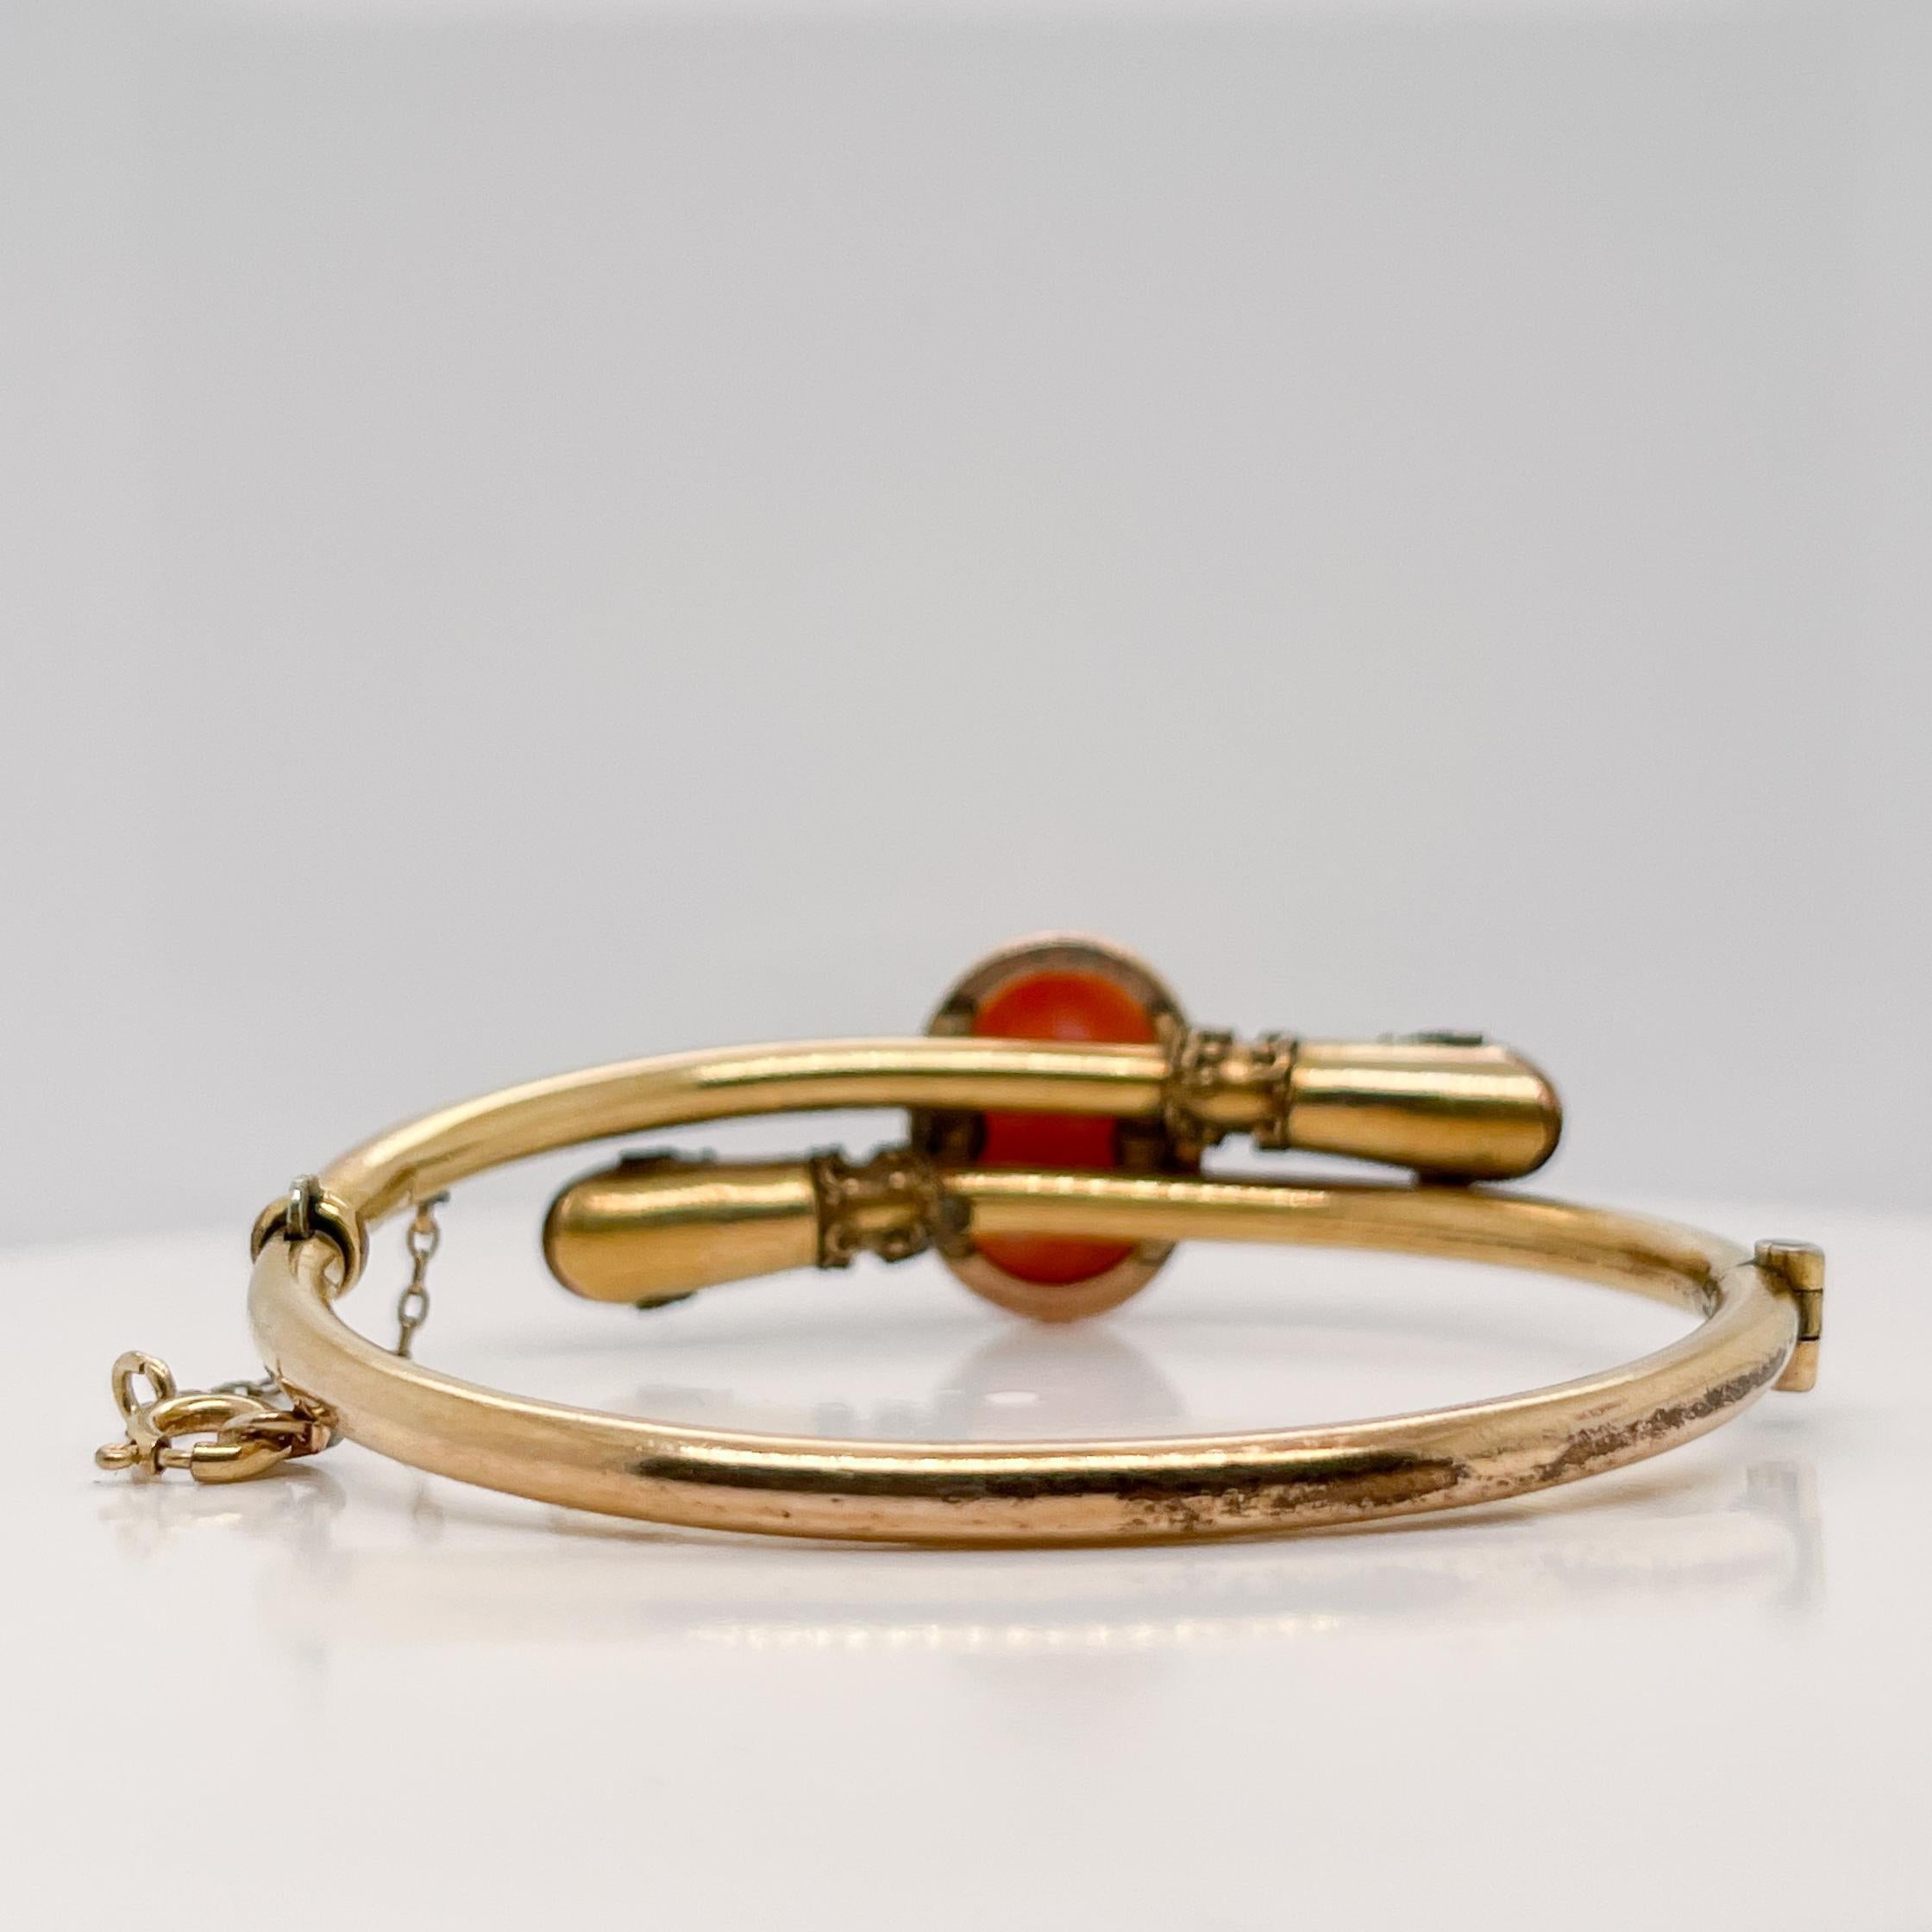 Cabochon Etruscan Revival Style Gold Filled Bangle Bracelet with a Carved Coral Cameo For Sale